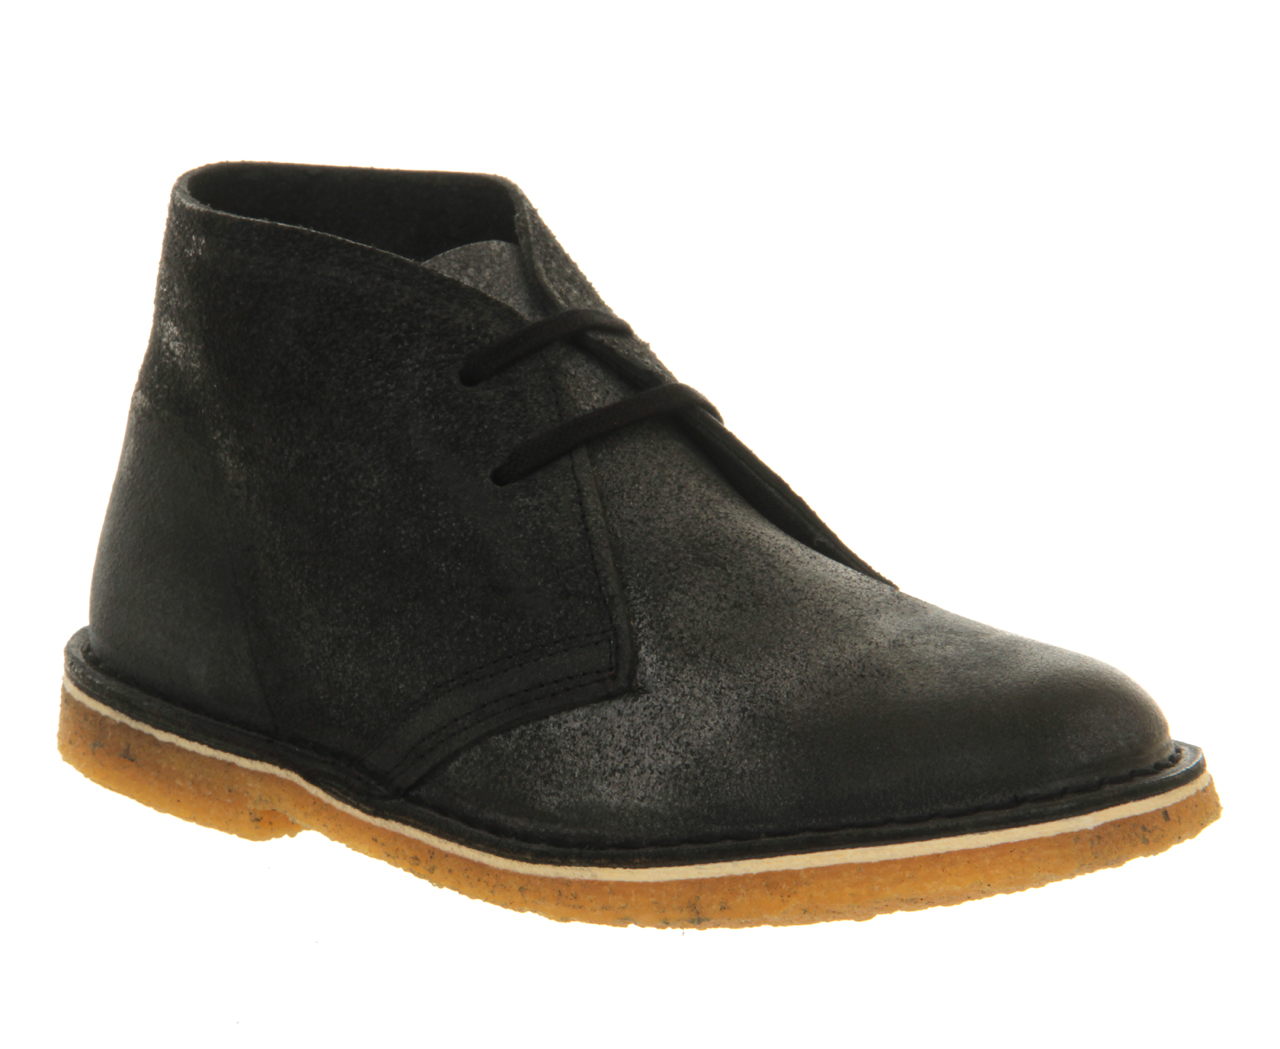 OFFICEMallow Desert bootsBlack Distressed Suede